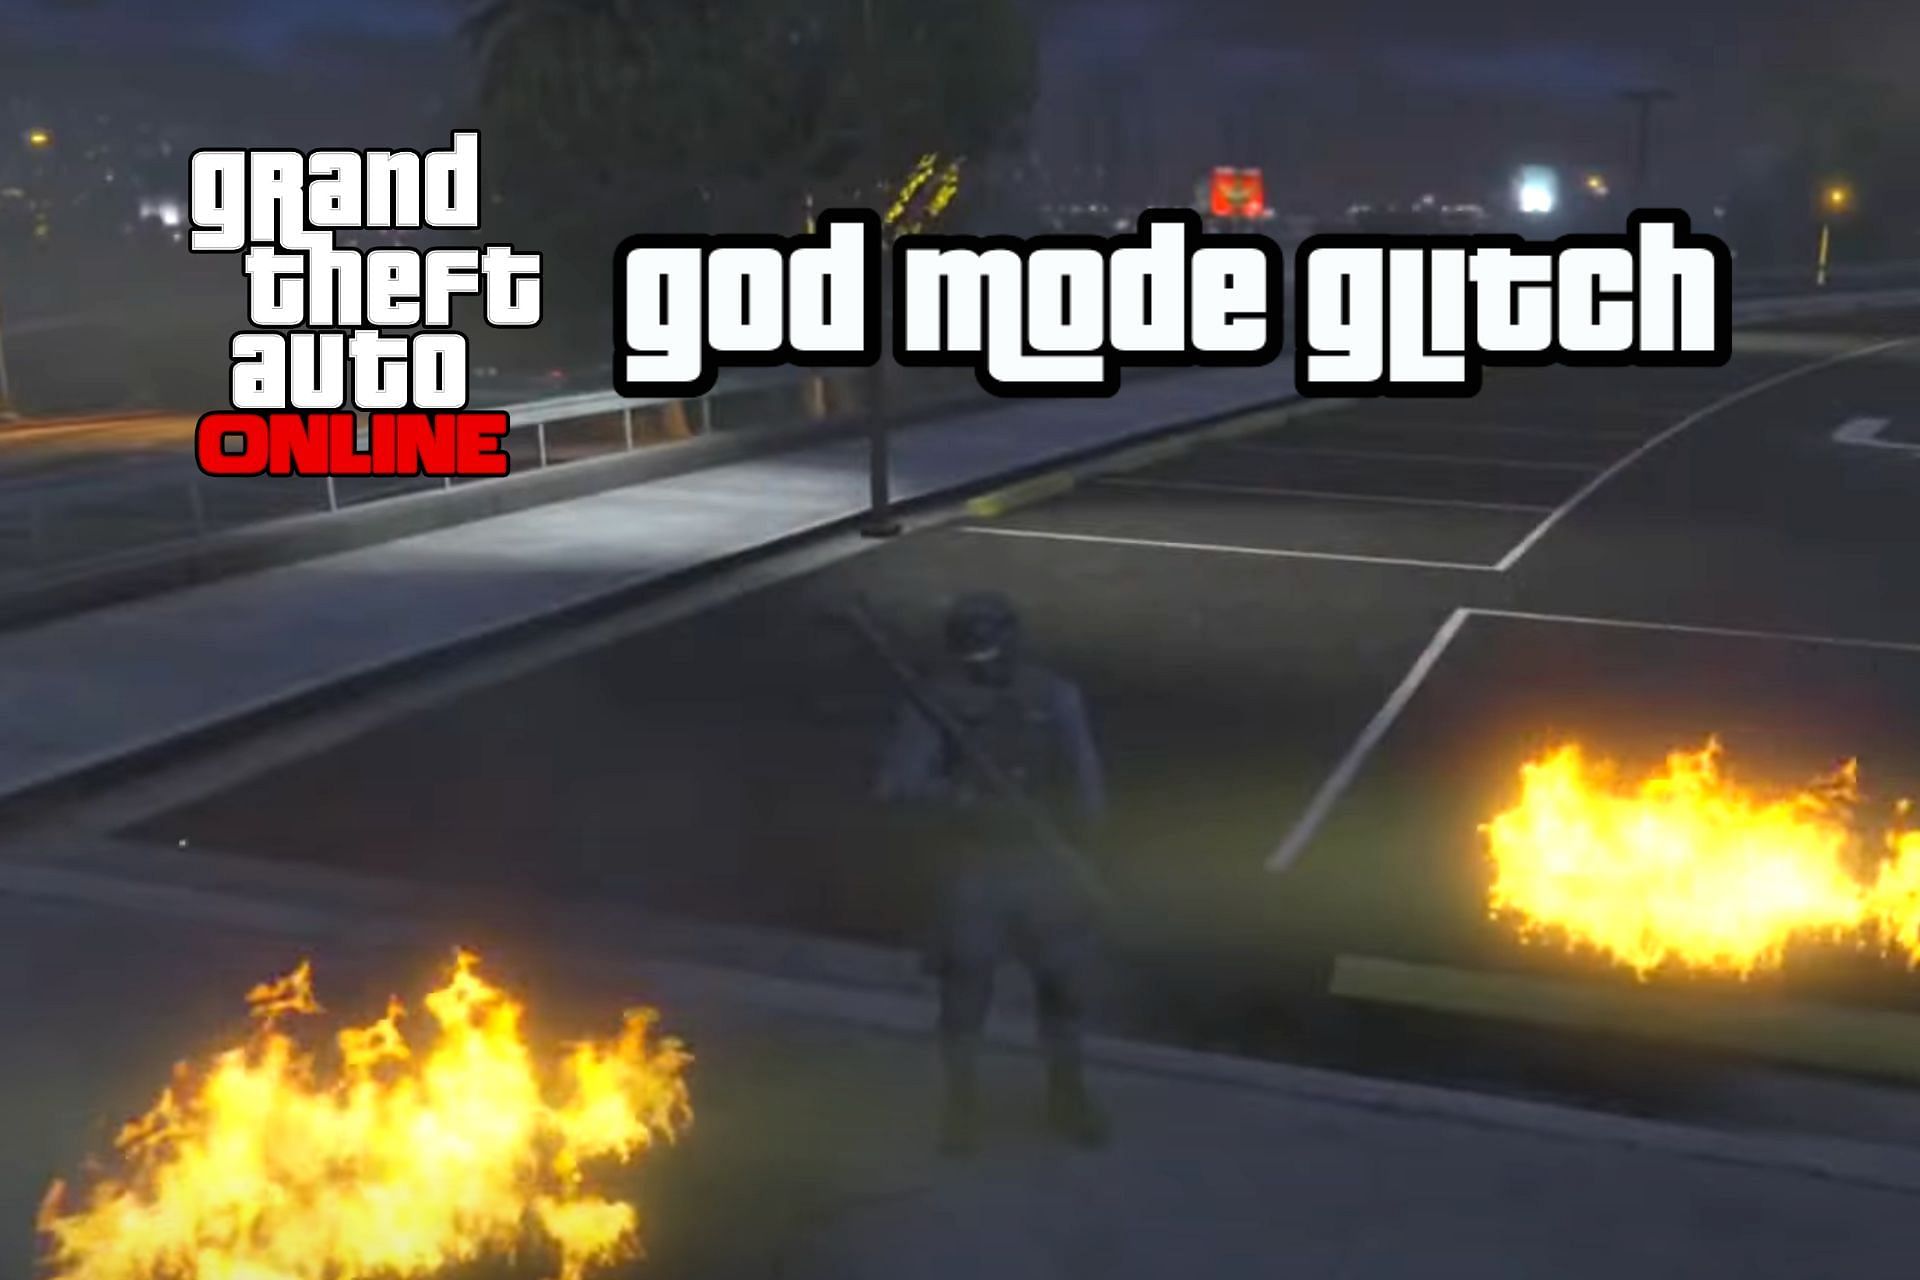 GTA Online players can try this harmless God Mode glitch for some thrilling experience in the game (Image via YT/Zert Mania)